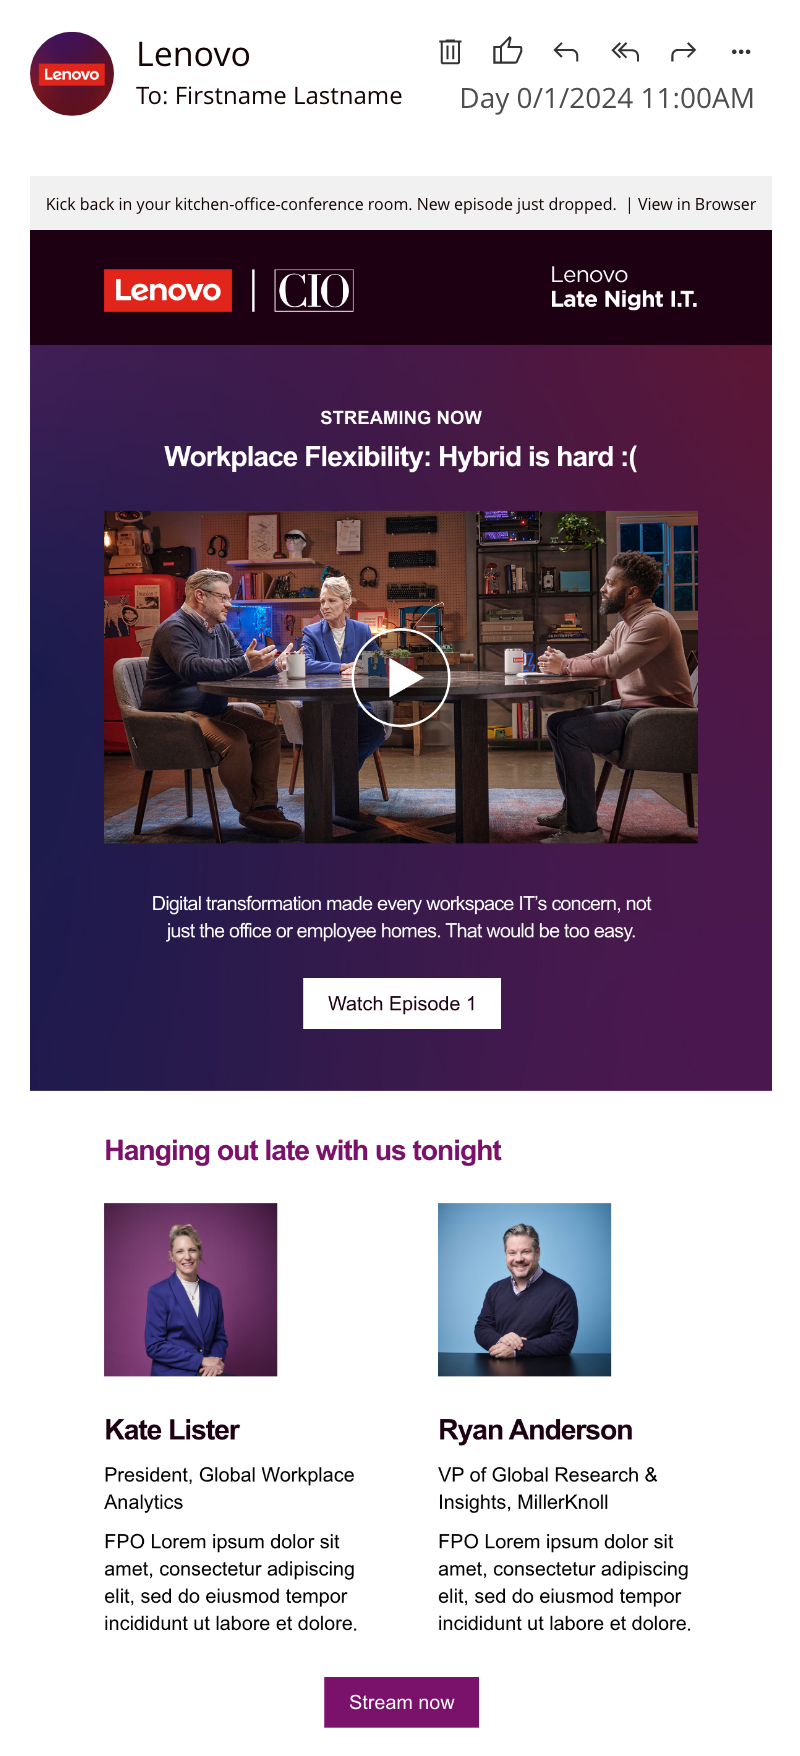 Lenovo Late Night I.T. episode email example.